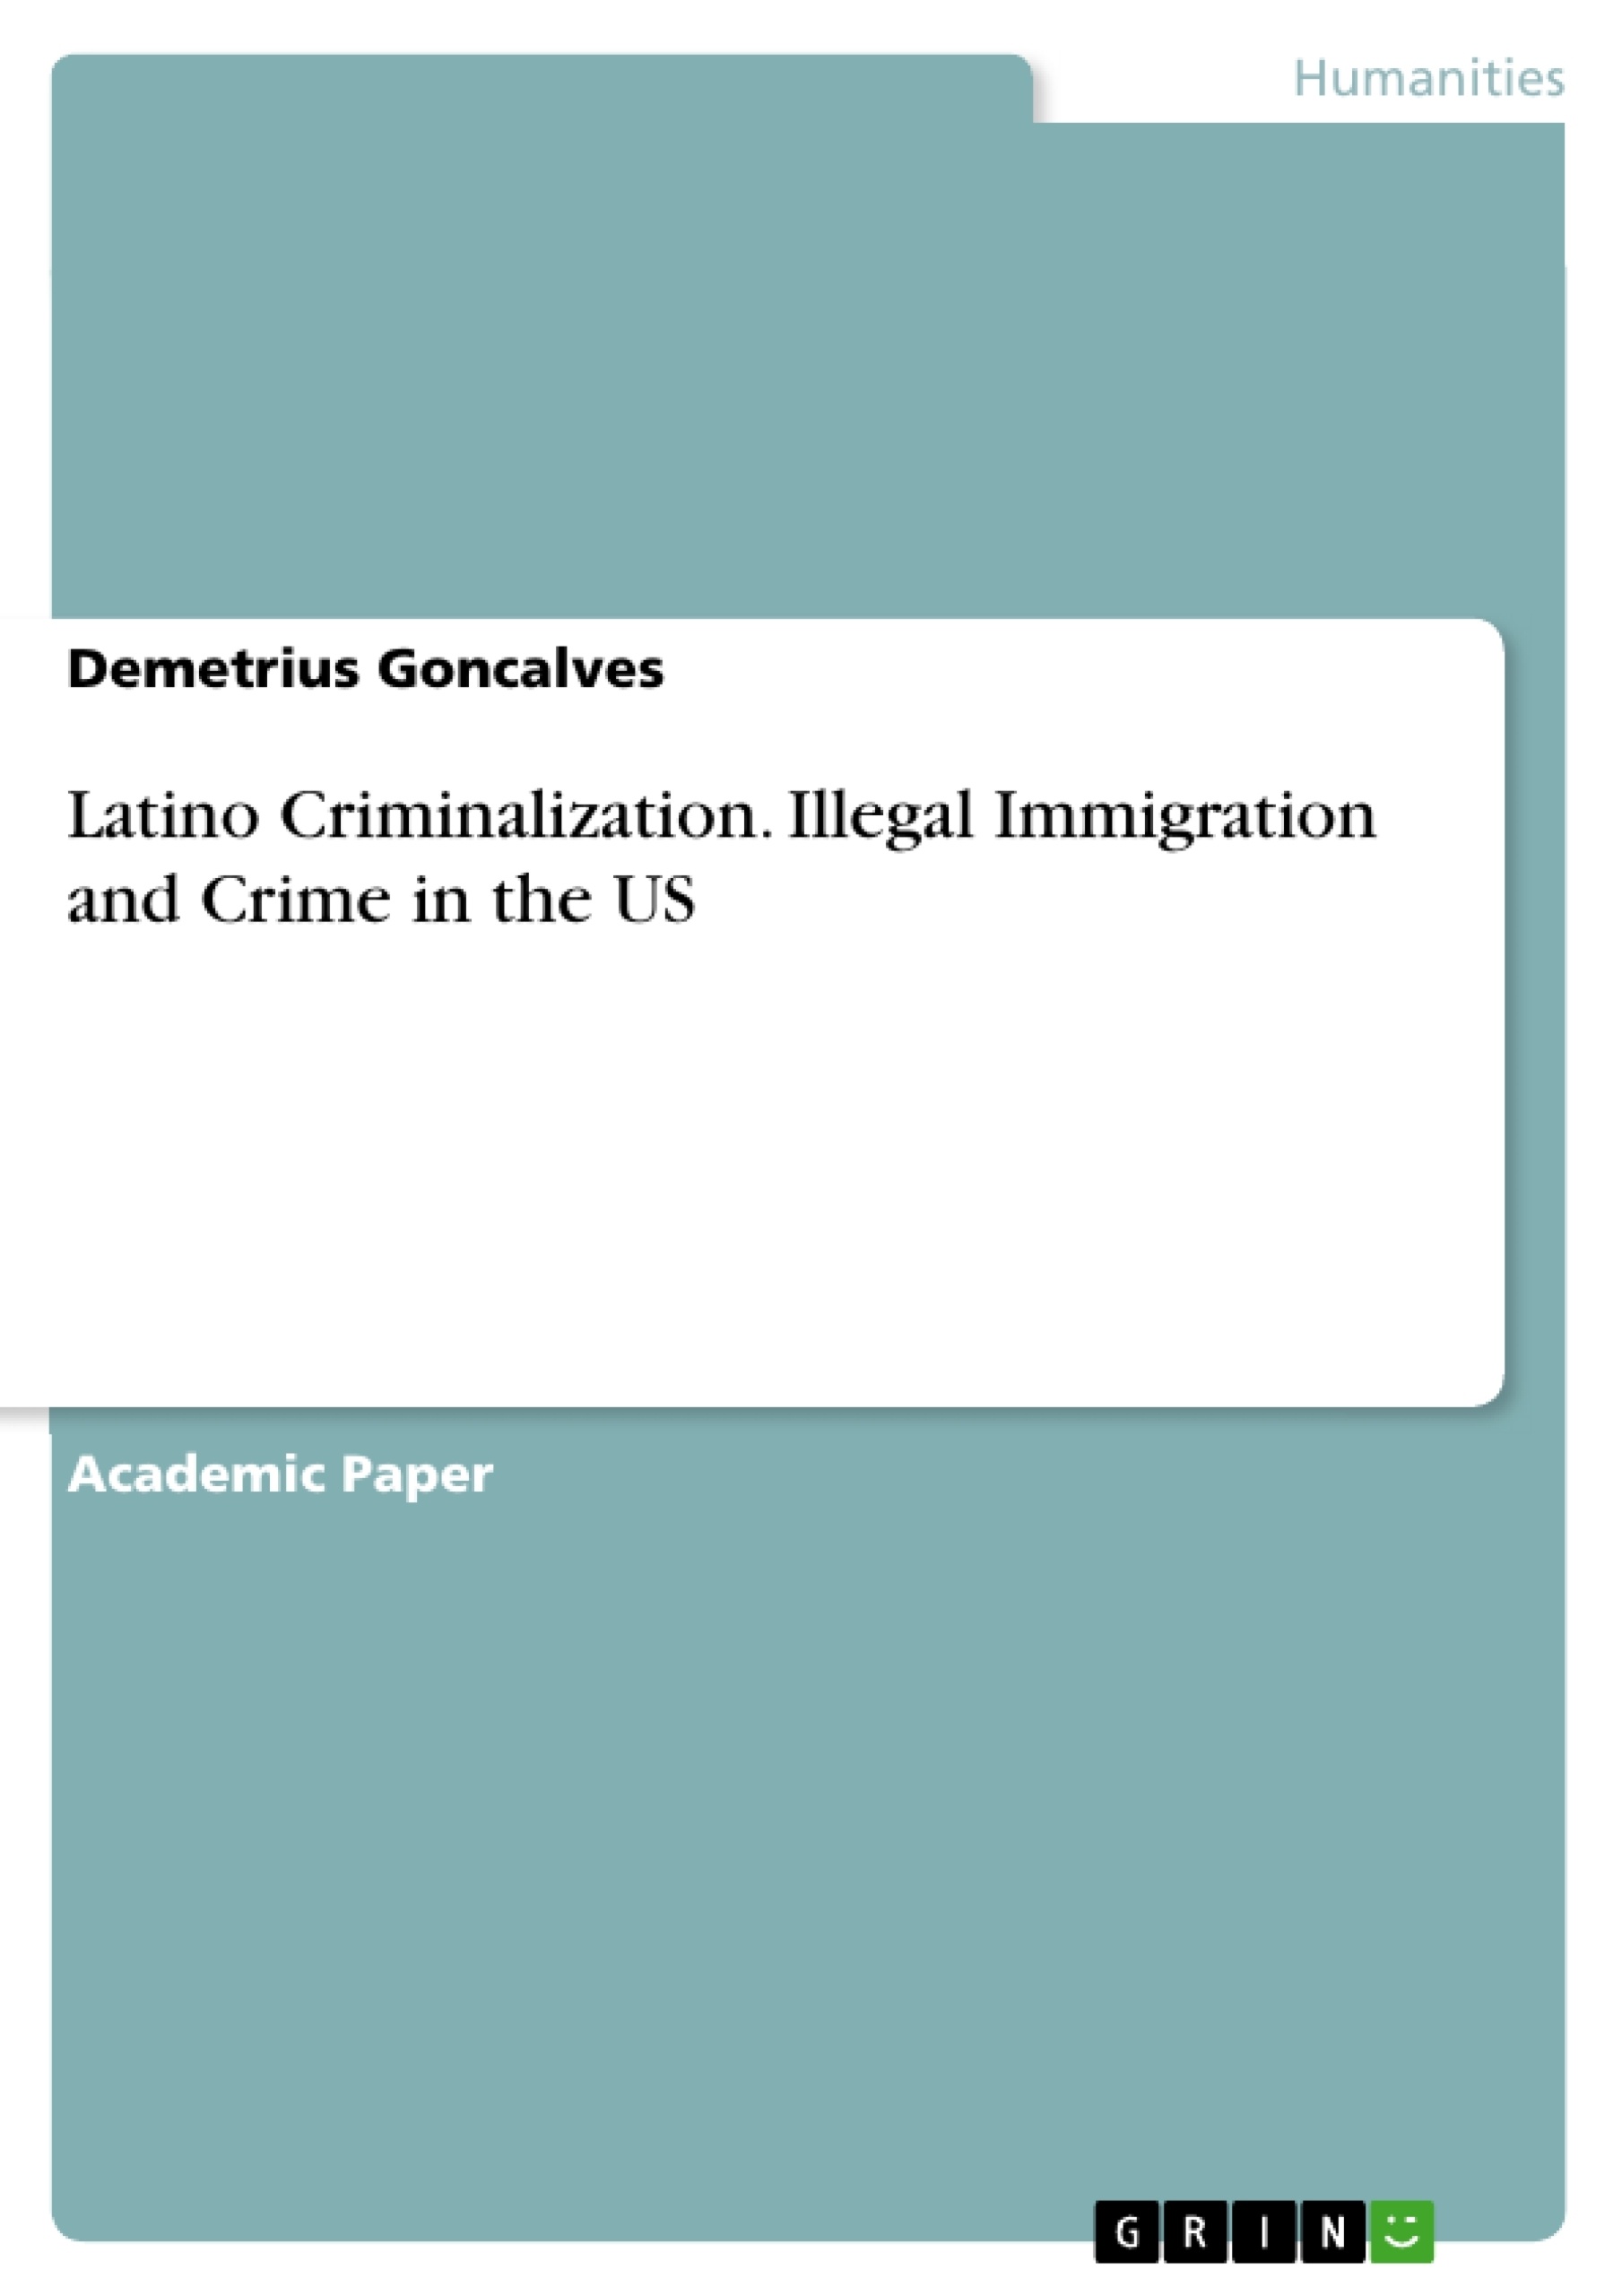 Title: Latino Criminalization. Illegal Immigration and Crime in the US